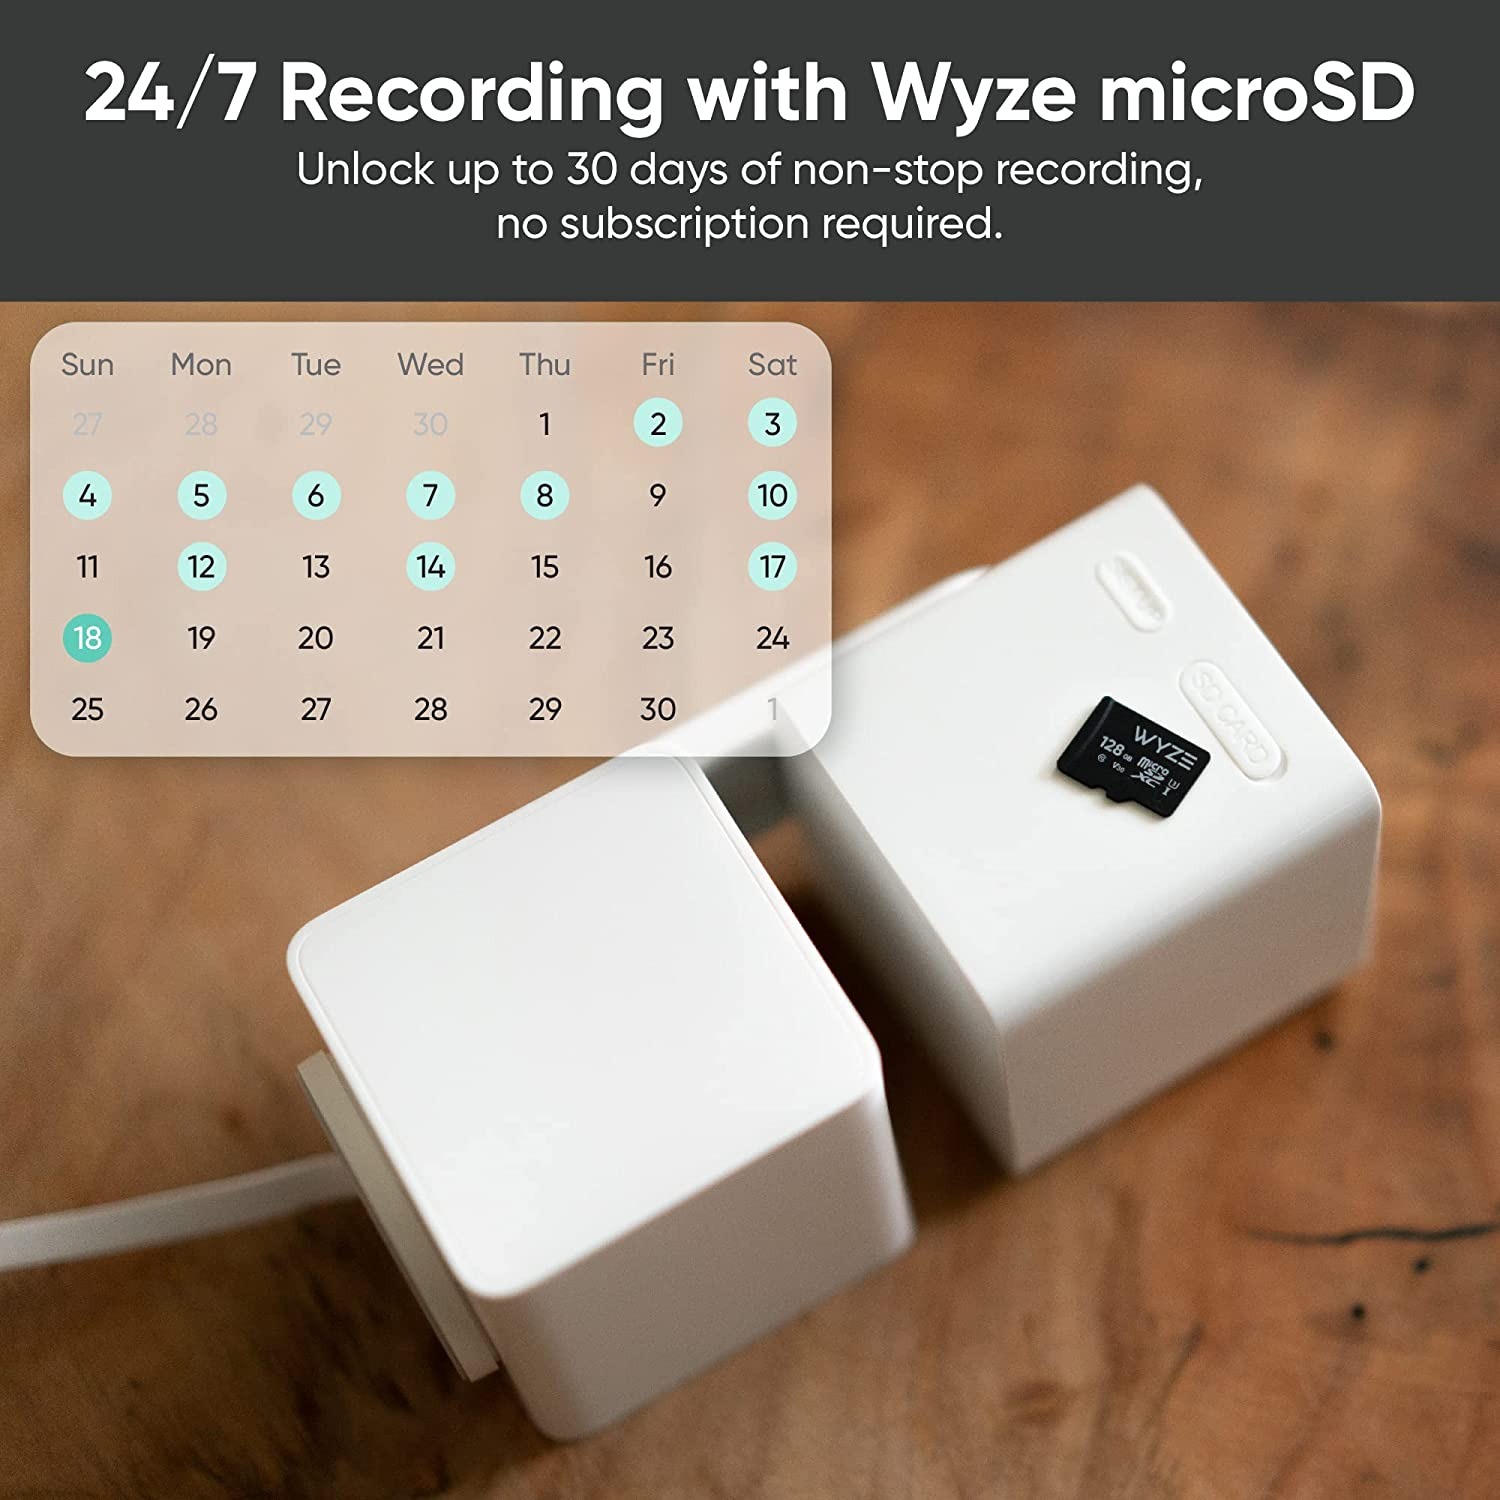 The Ultimate Security Camera: Keep Your Home Safe and Sound with the Wyze Cam V3